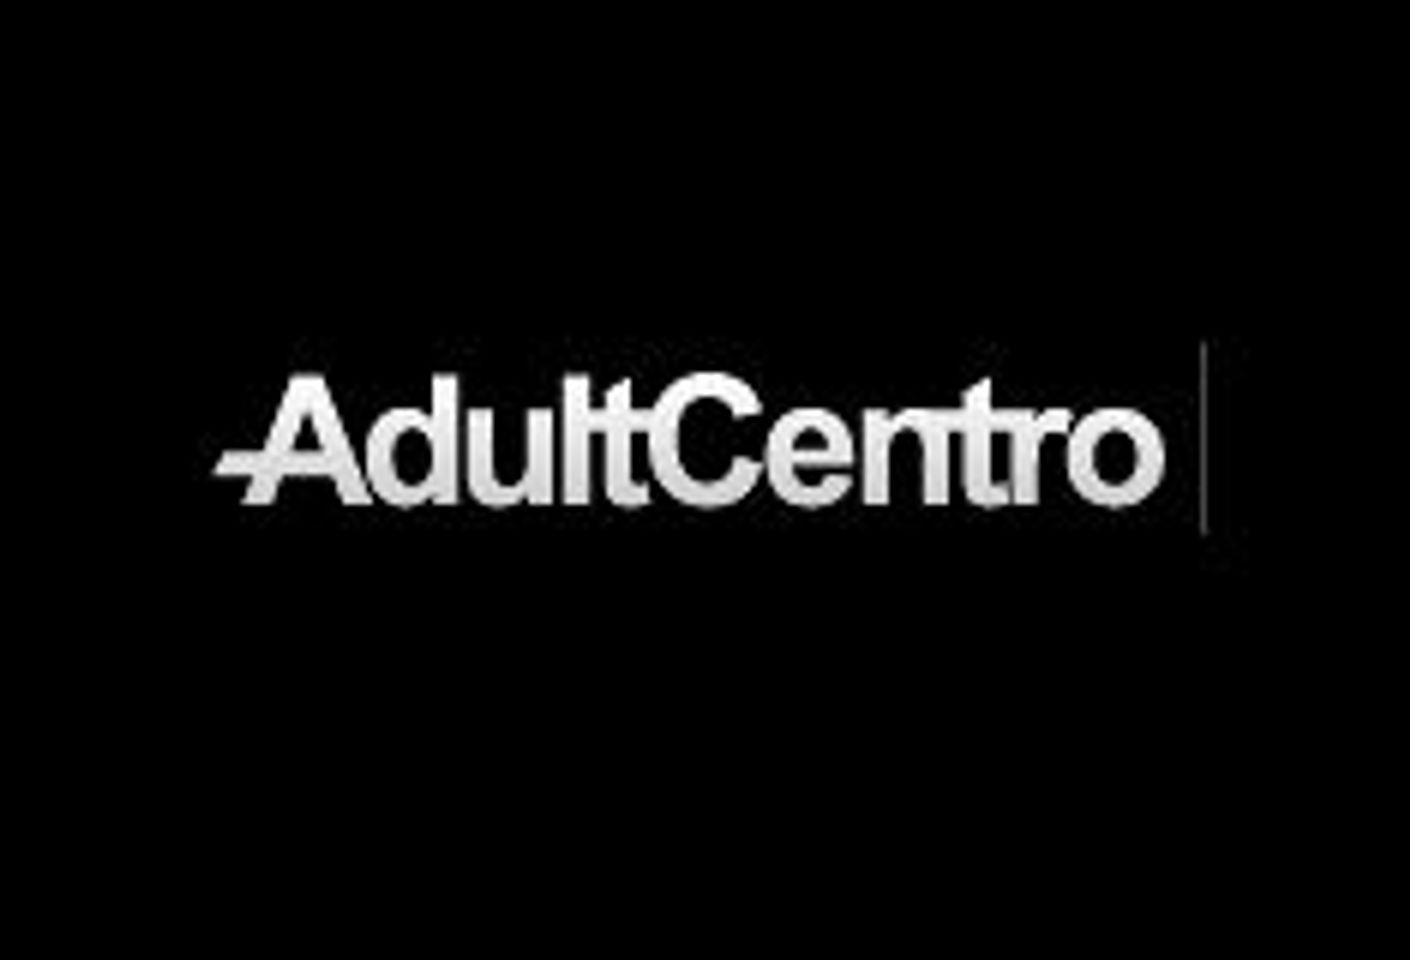 AdultCentro Adds Developments to Its Content Leasing Platform